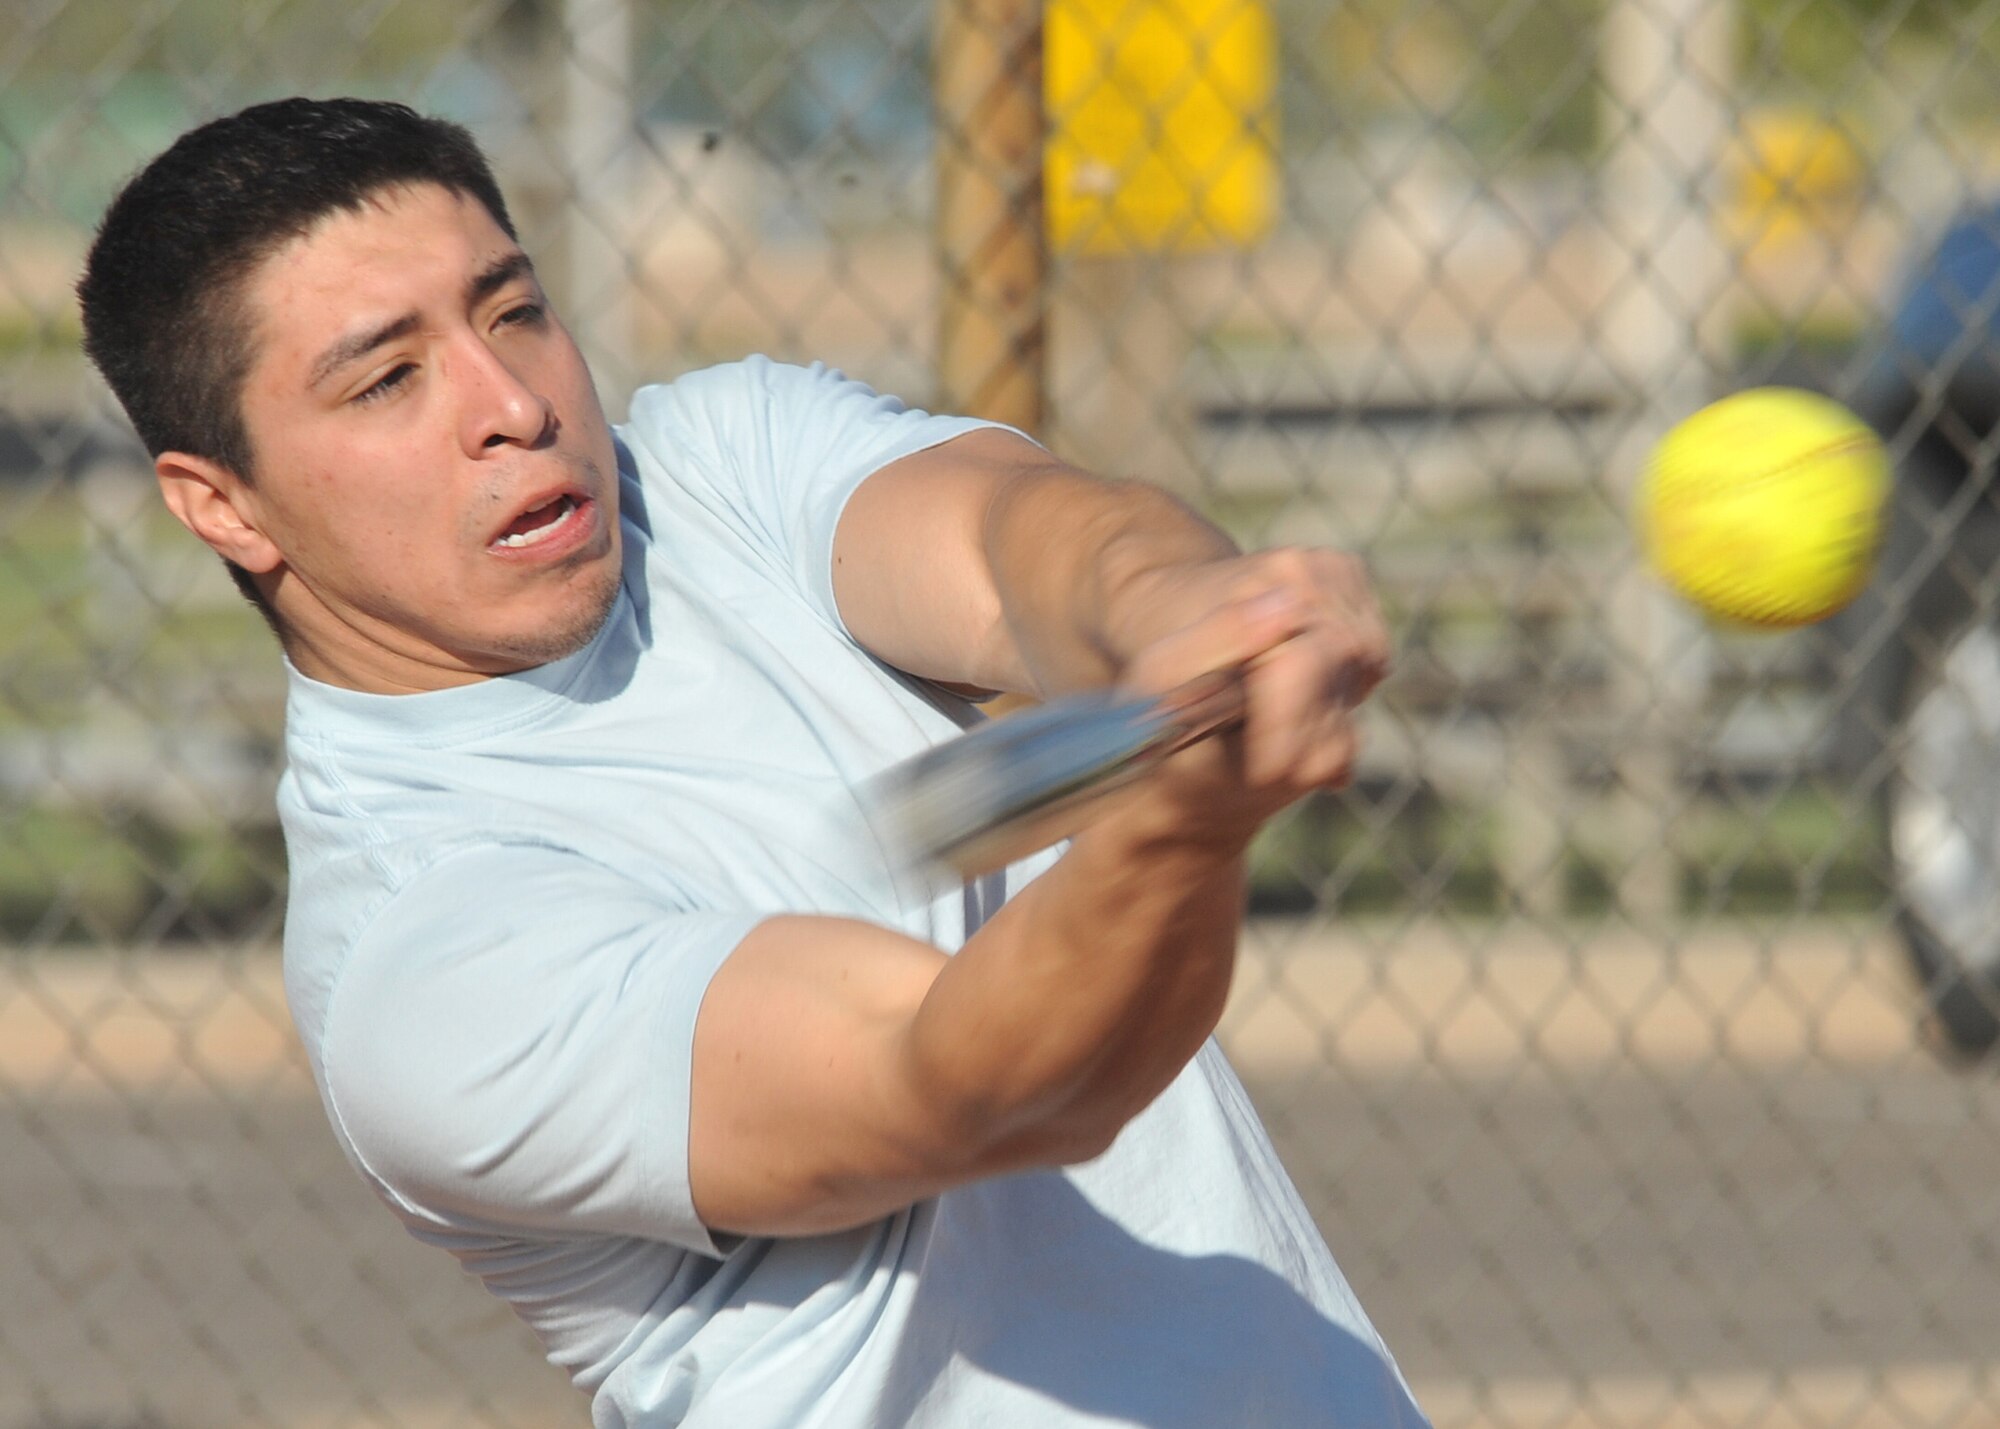 Estavan Martinez connects with the softball for a base hit during 2010 Fall Wing Sports Day. U.S. Air Force Photo by Todd Berenger